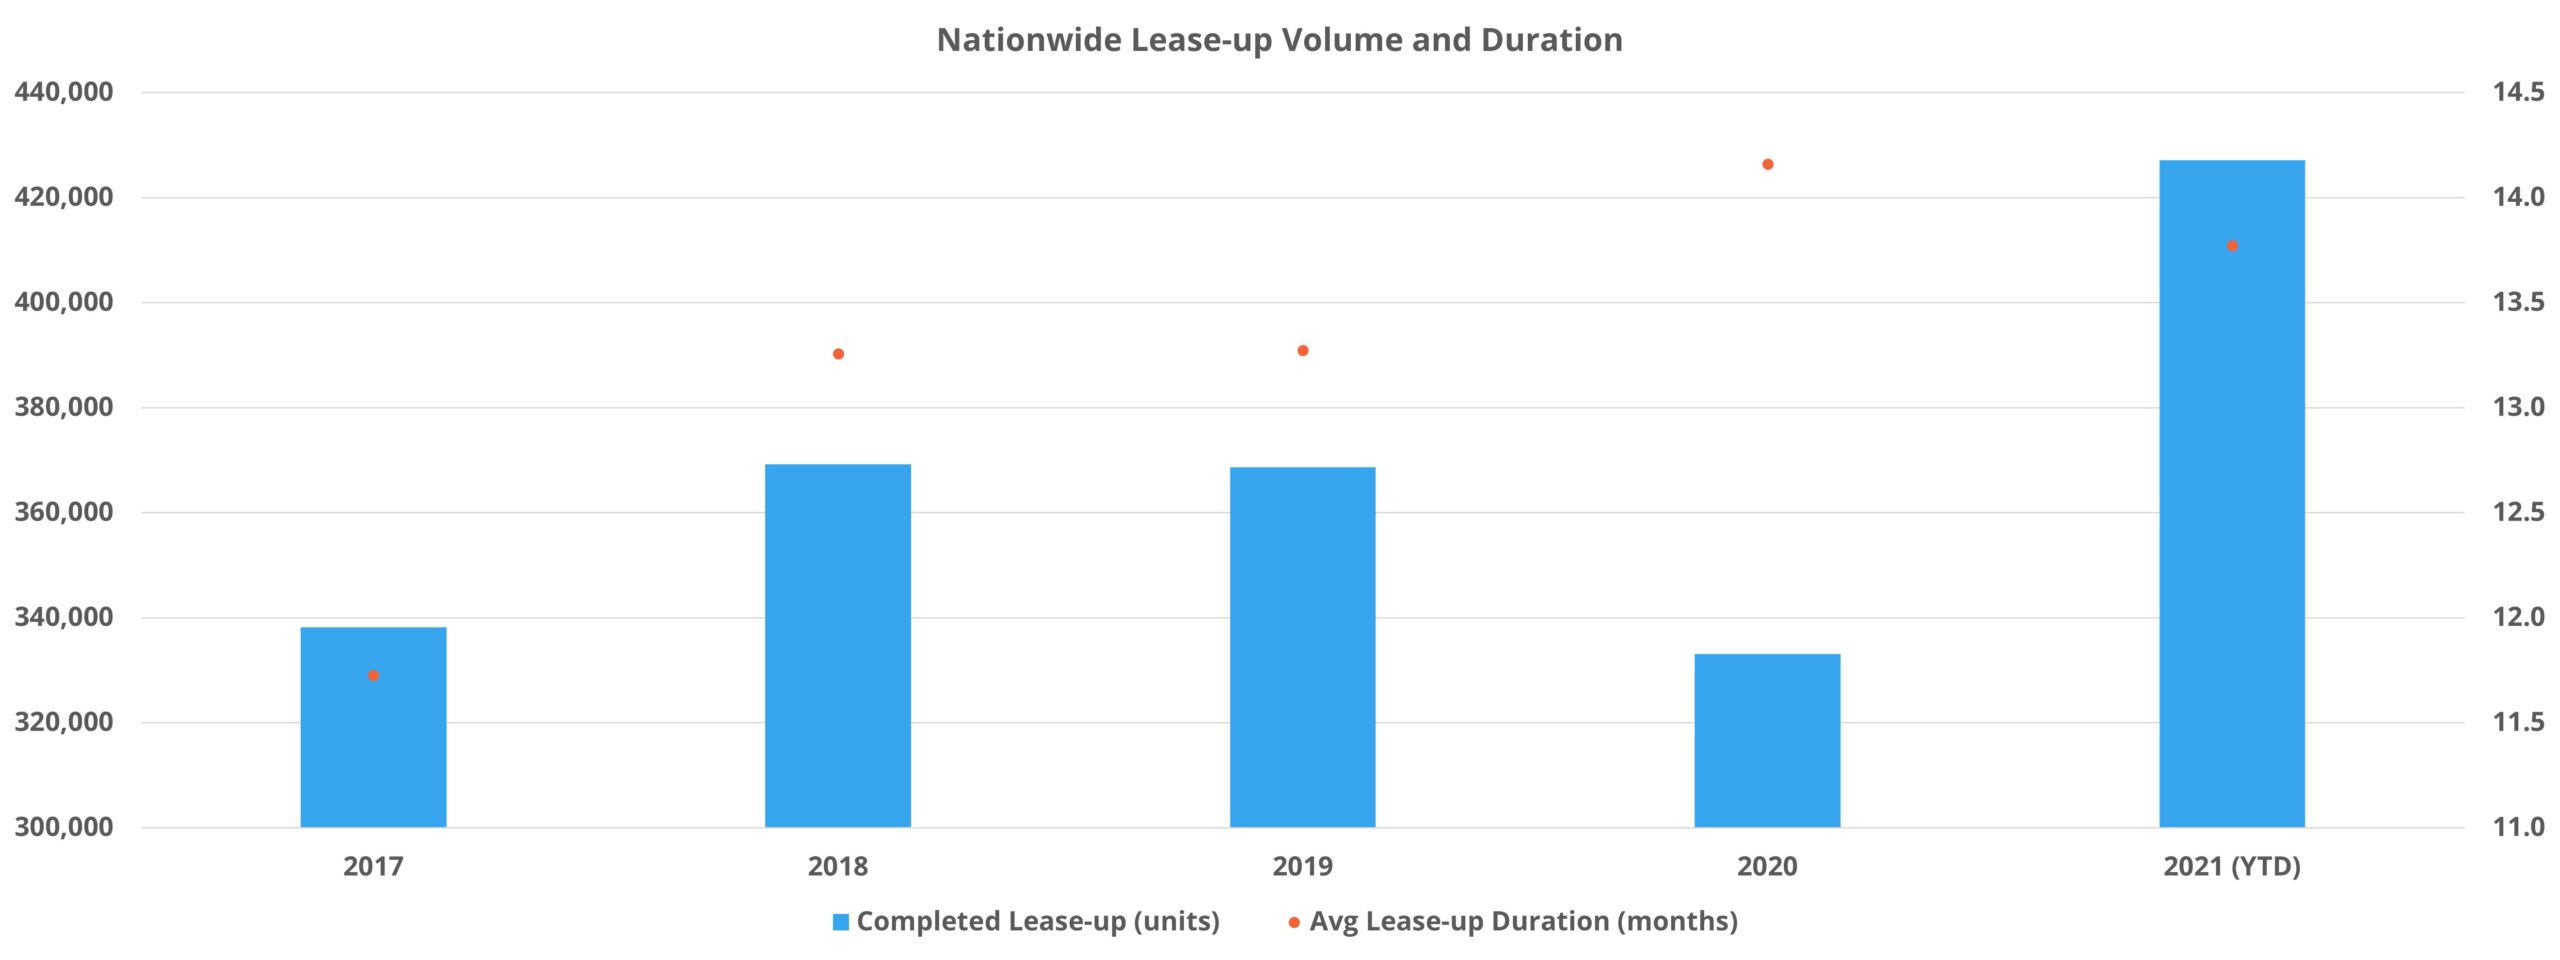 Nationwide Lease-up Volume and Duration